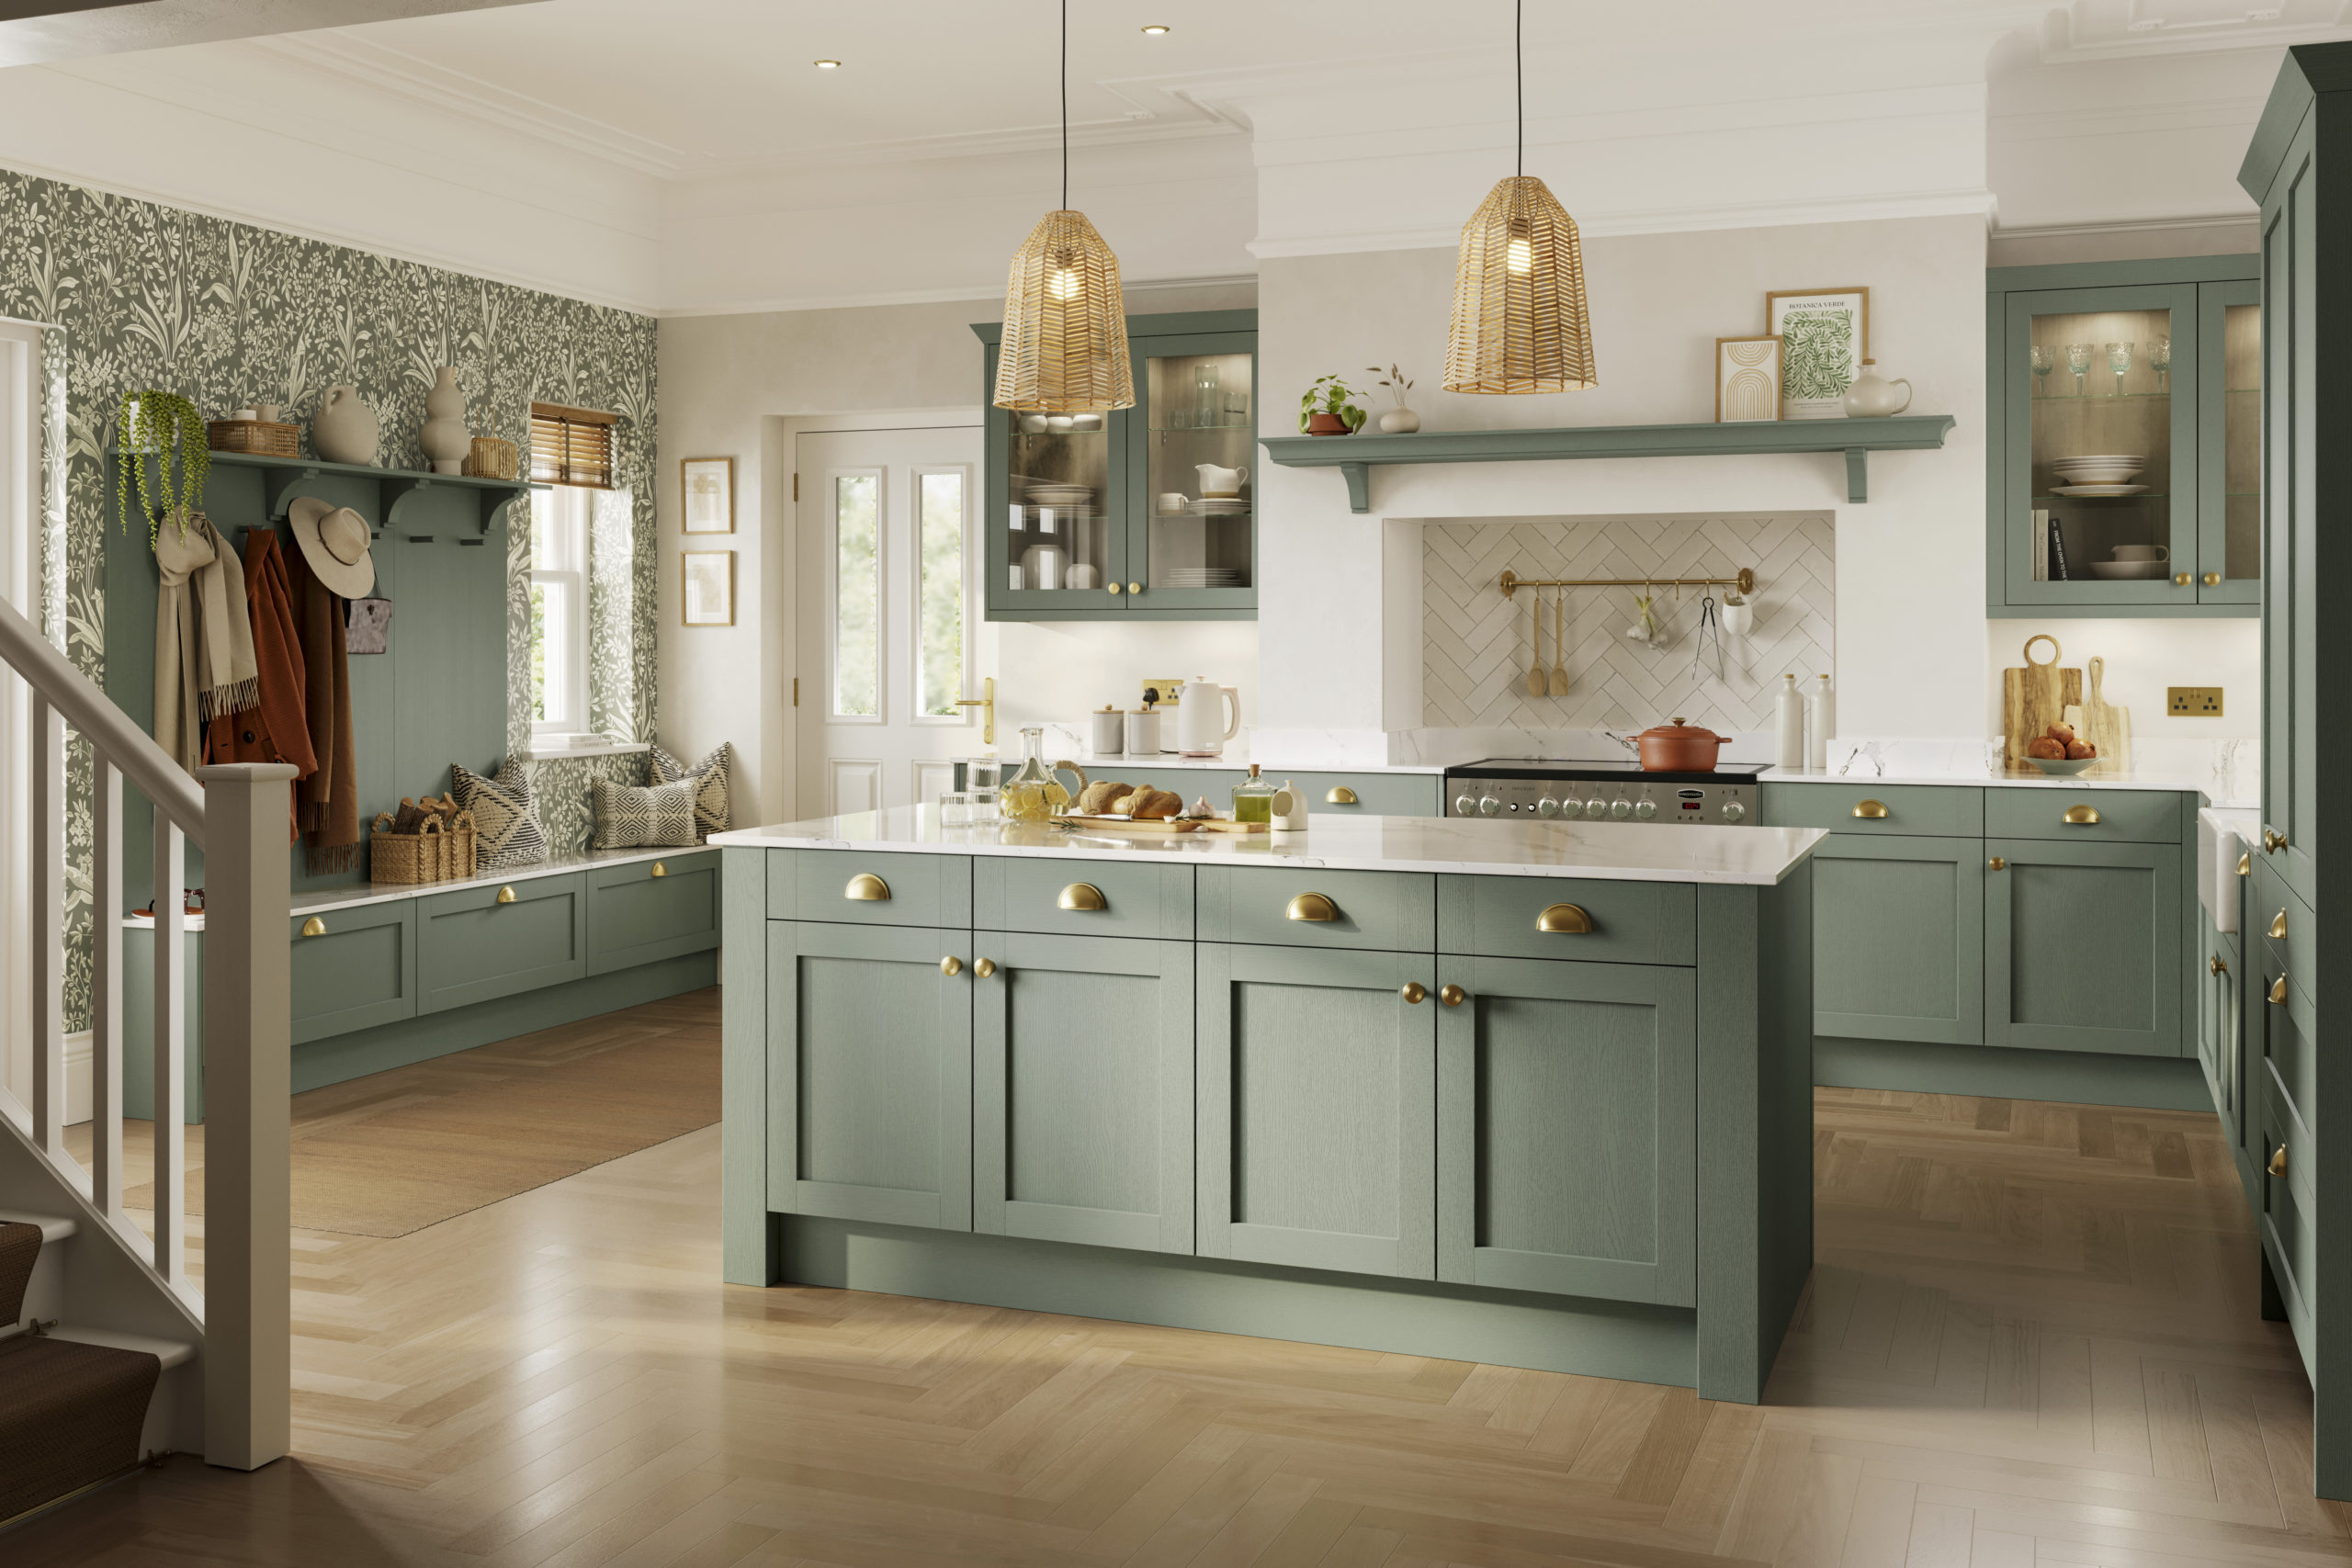 Symphony Launches New Langdale Fitted Kitchen for a Contemporary Take on a Classic Shaker Style